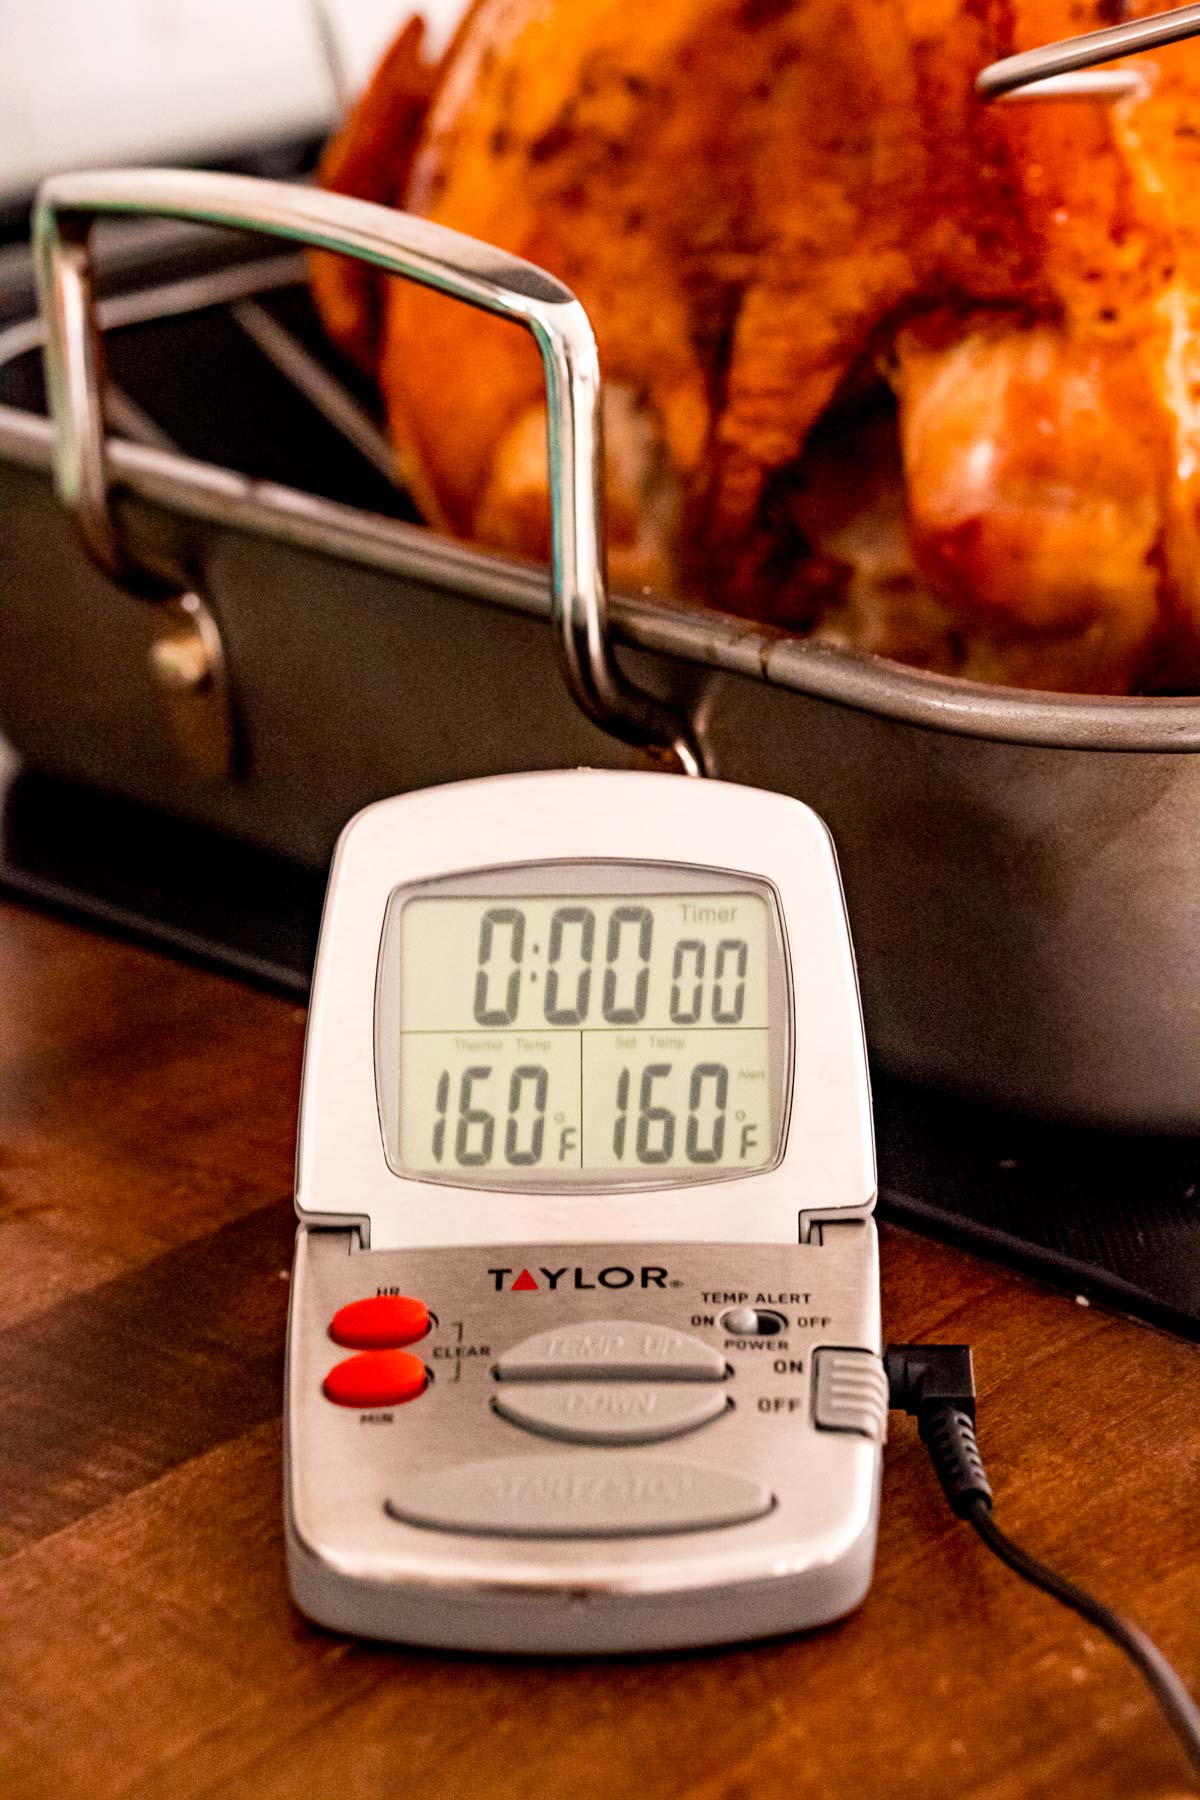 Digital thermometer giving a reading on a roasted turkey.